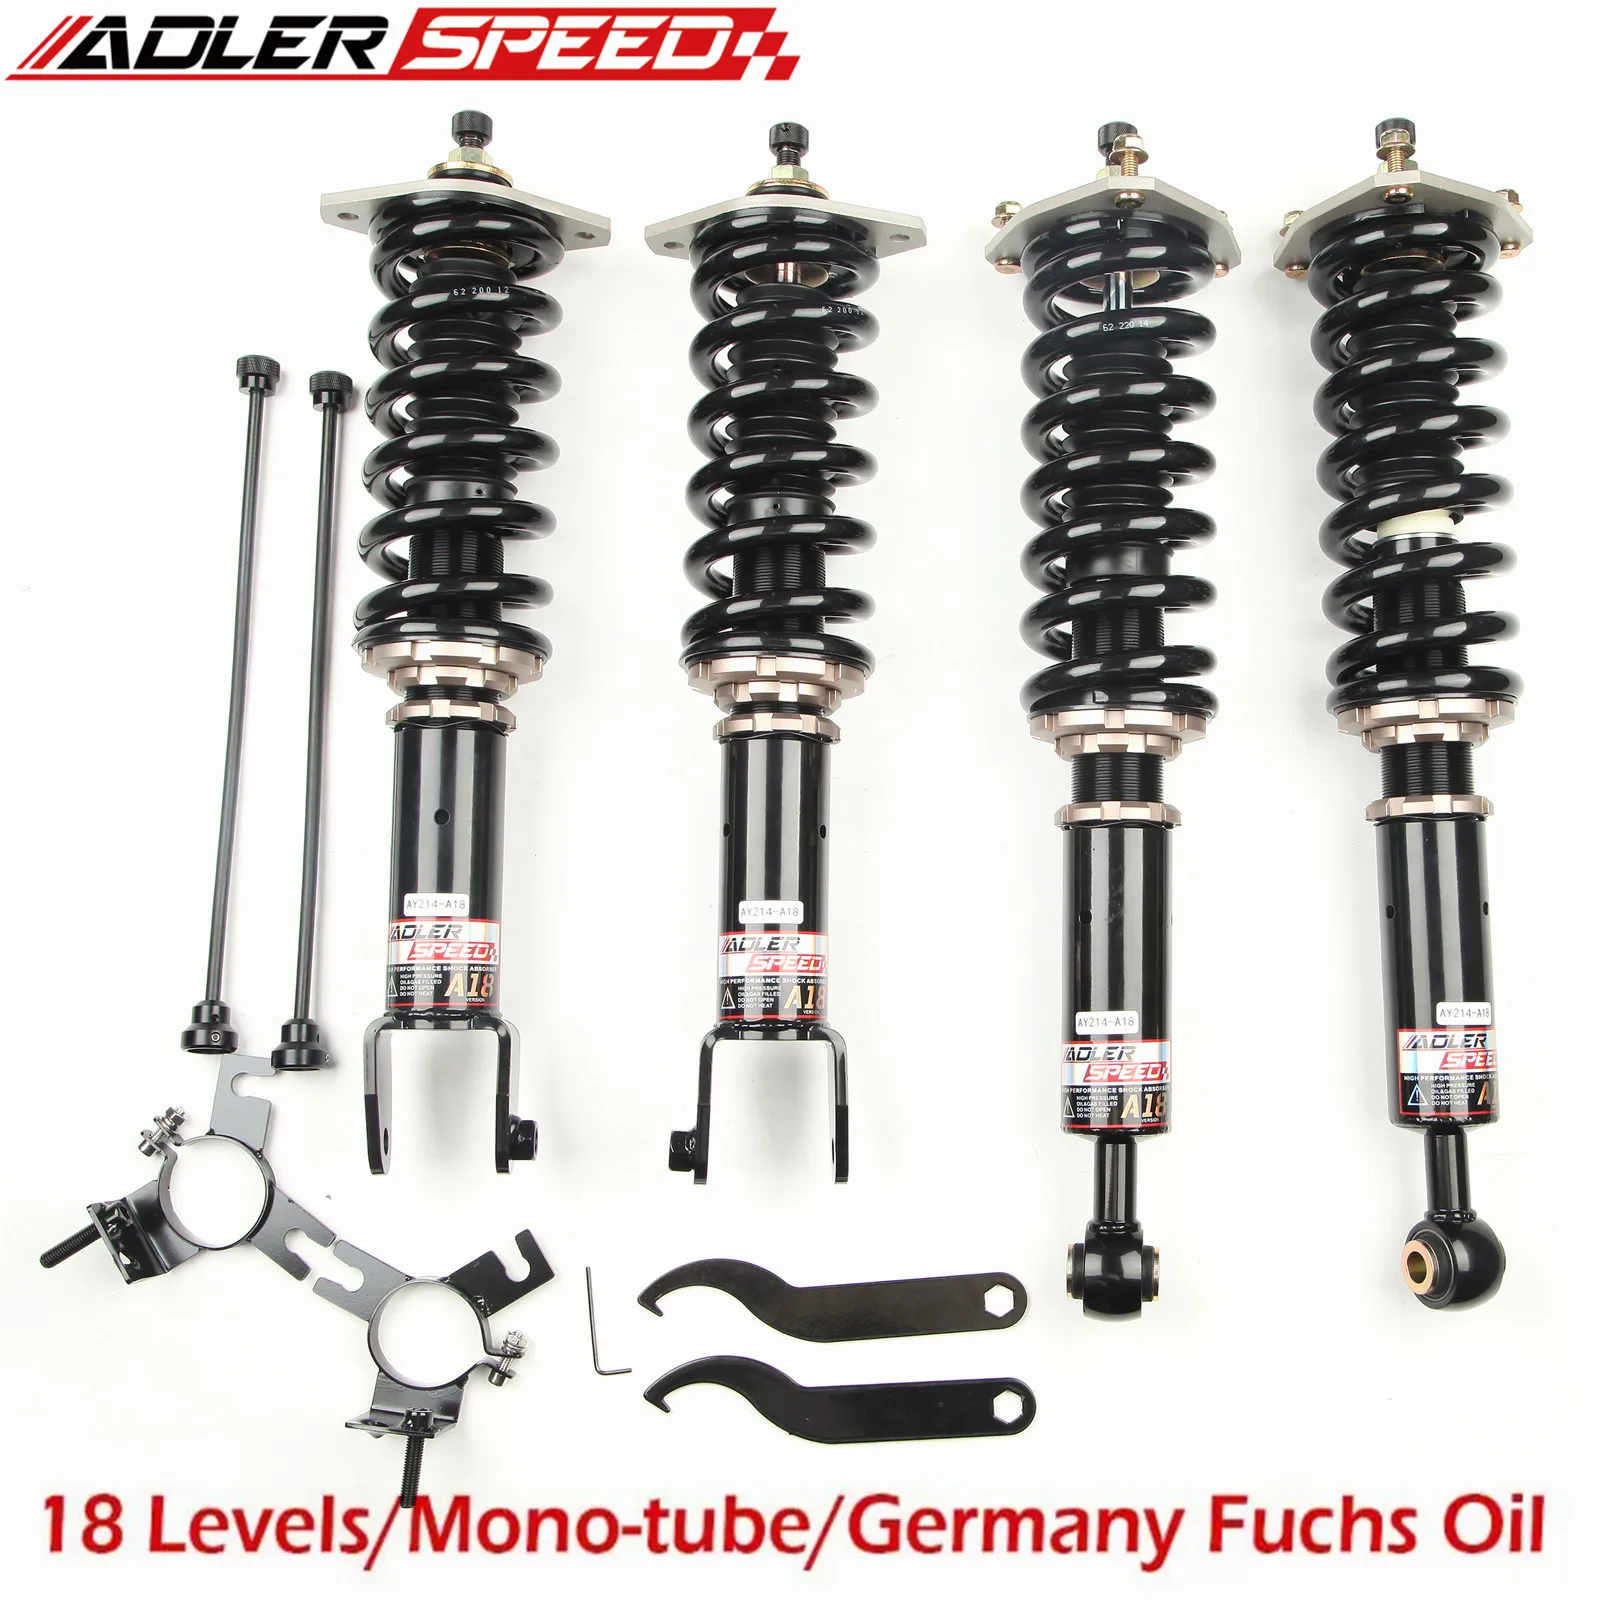 

ADLERSPEED 18 Way Mono Tube Coilovers Lowering Suspension For Infiniti G37 Coupe / Sedan RWD (CV36/V36) 2008-13